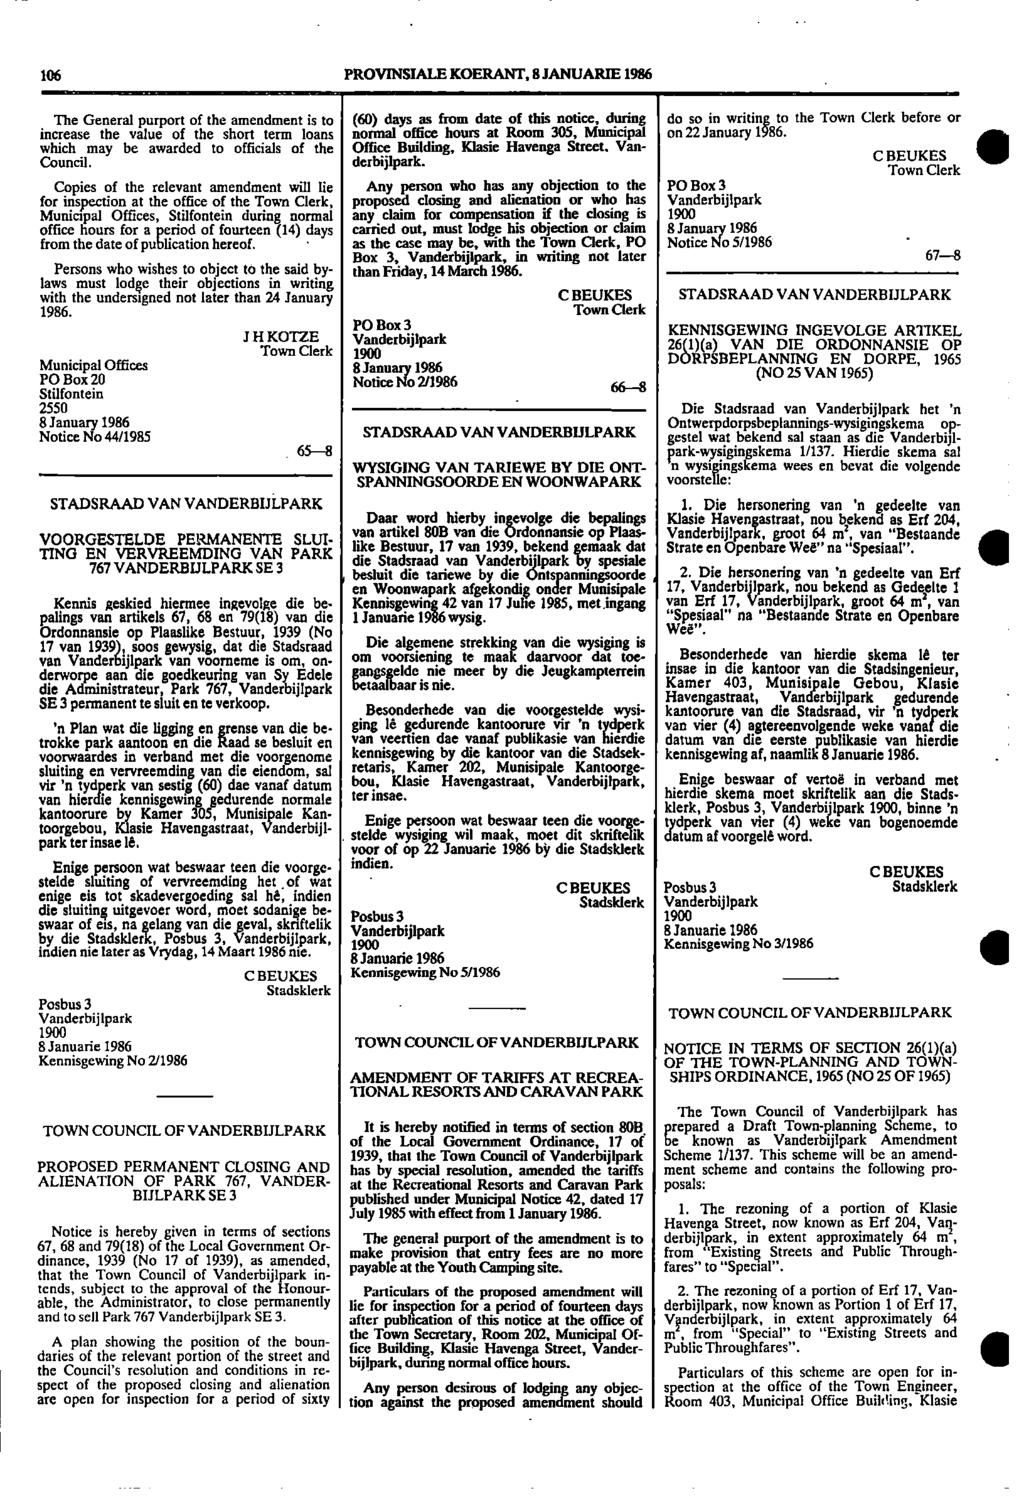 1 106 PROVINSIALE KOERANT, 8 JANUARIE 1986 The General purport of the amendment is to (60) days as from date of this notice, during do so in writing to the Town Clerk before or increase the value of